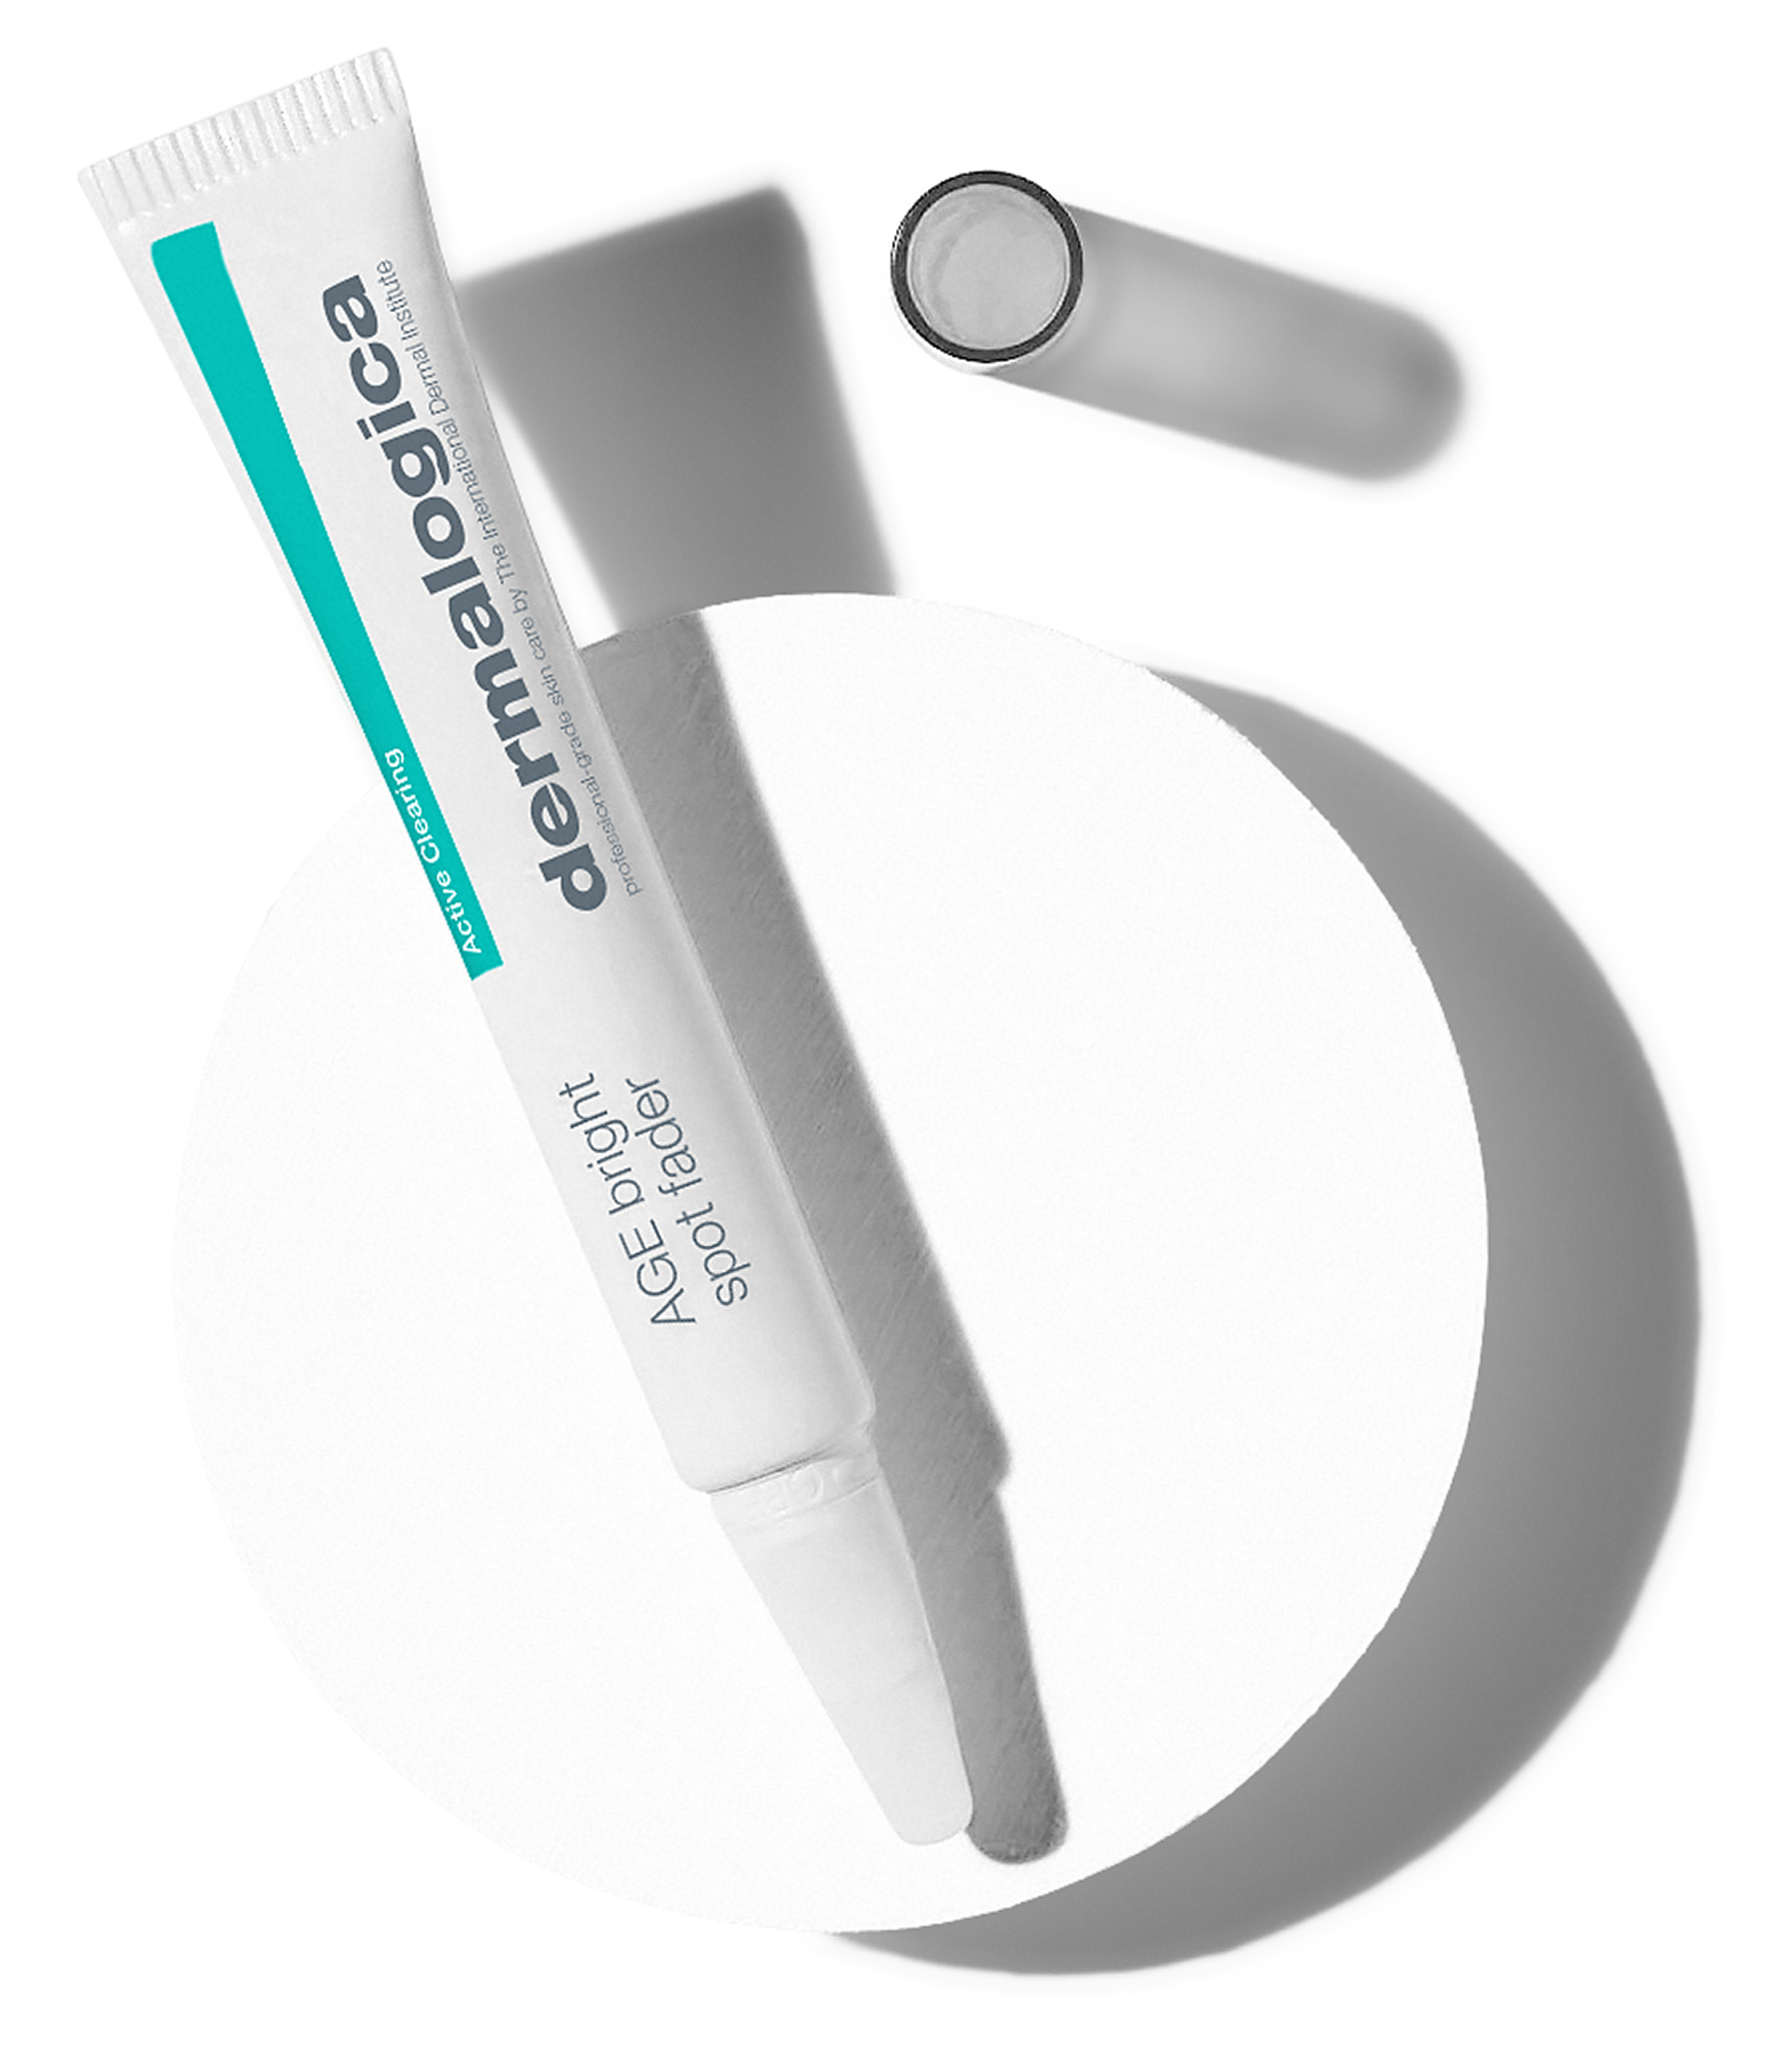 Dermalogica choses Micro Squeeze’n Spatula tube from Cosmogen